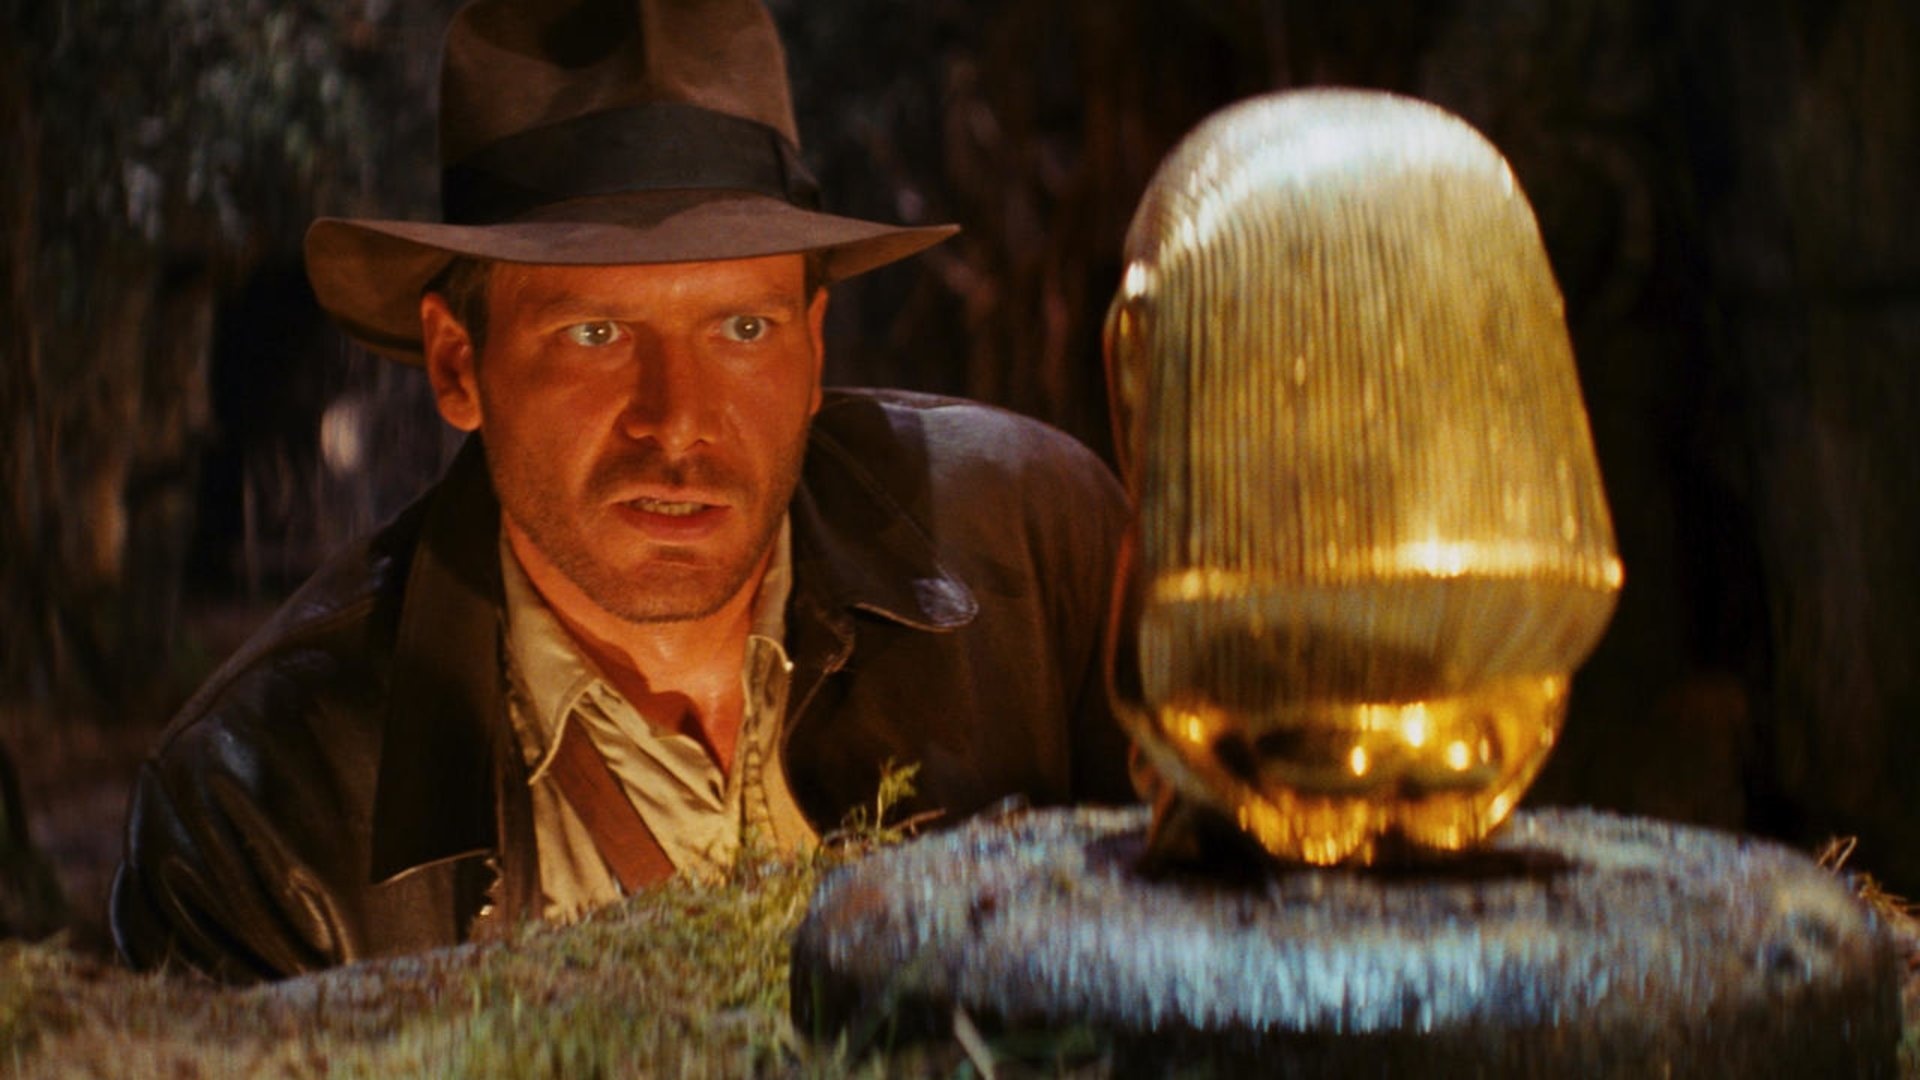 Harrison Ford (Indiana Jones): The iconic fictional character created by George Lucas and Stephen Spielberg. 1920x1080 Full HD Background.